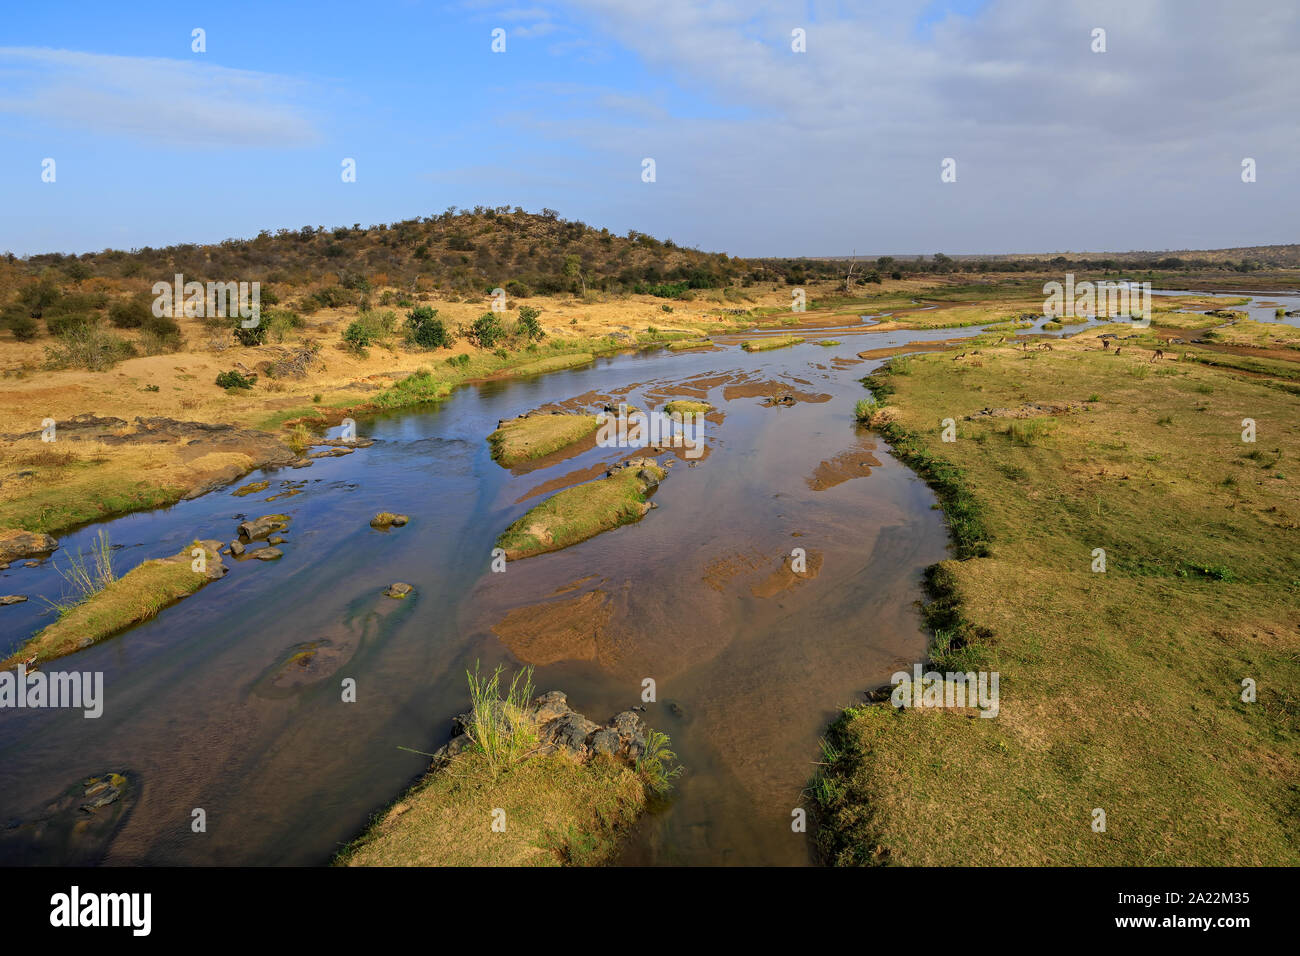 Landscape view of the olifants river, Kruger National Park, South Africa Stock Photo